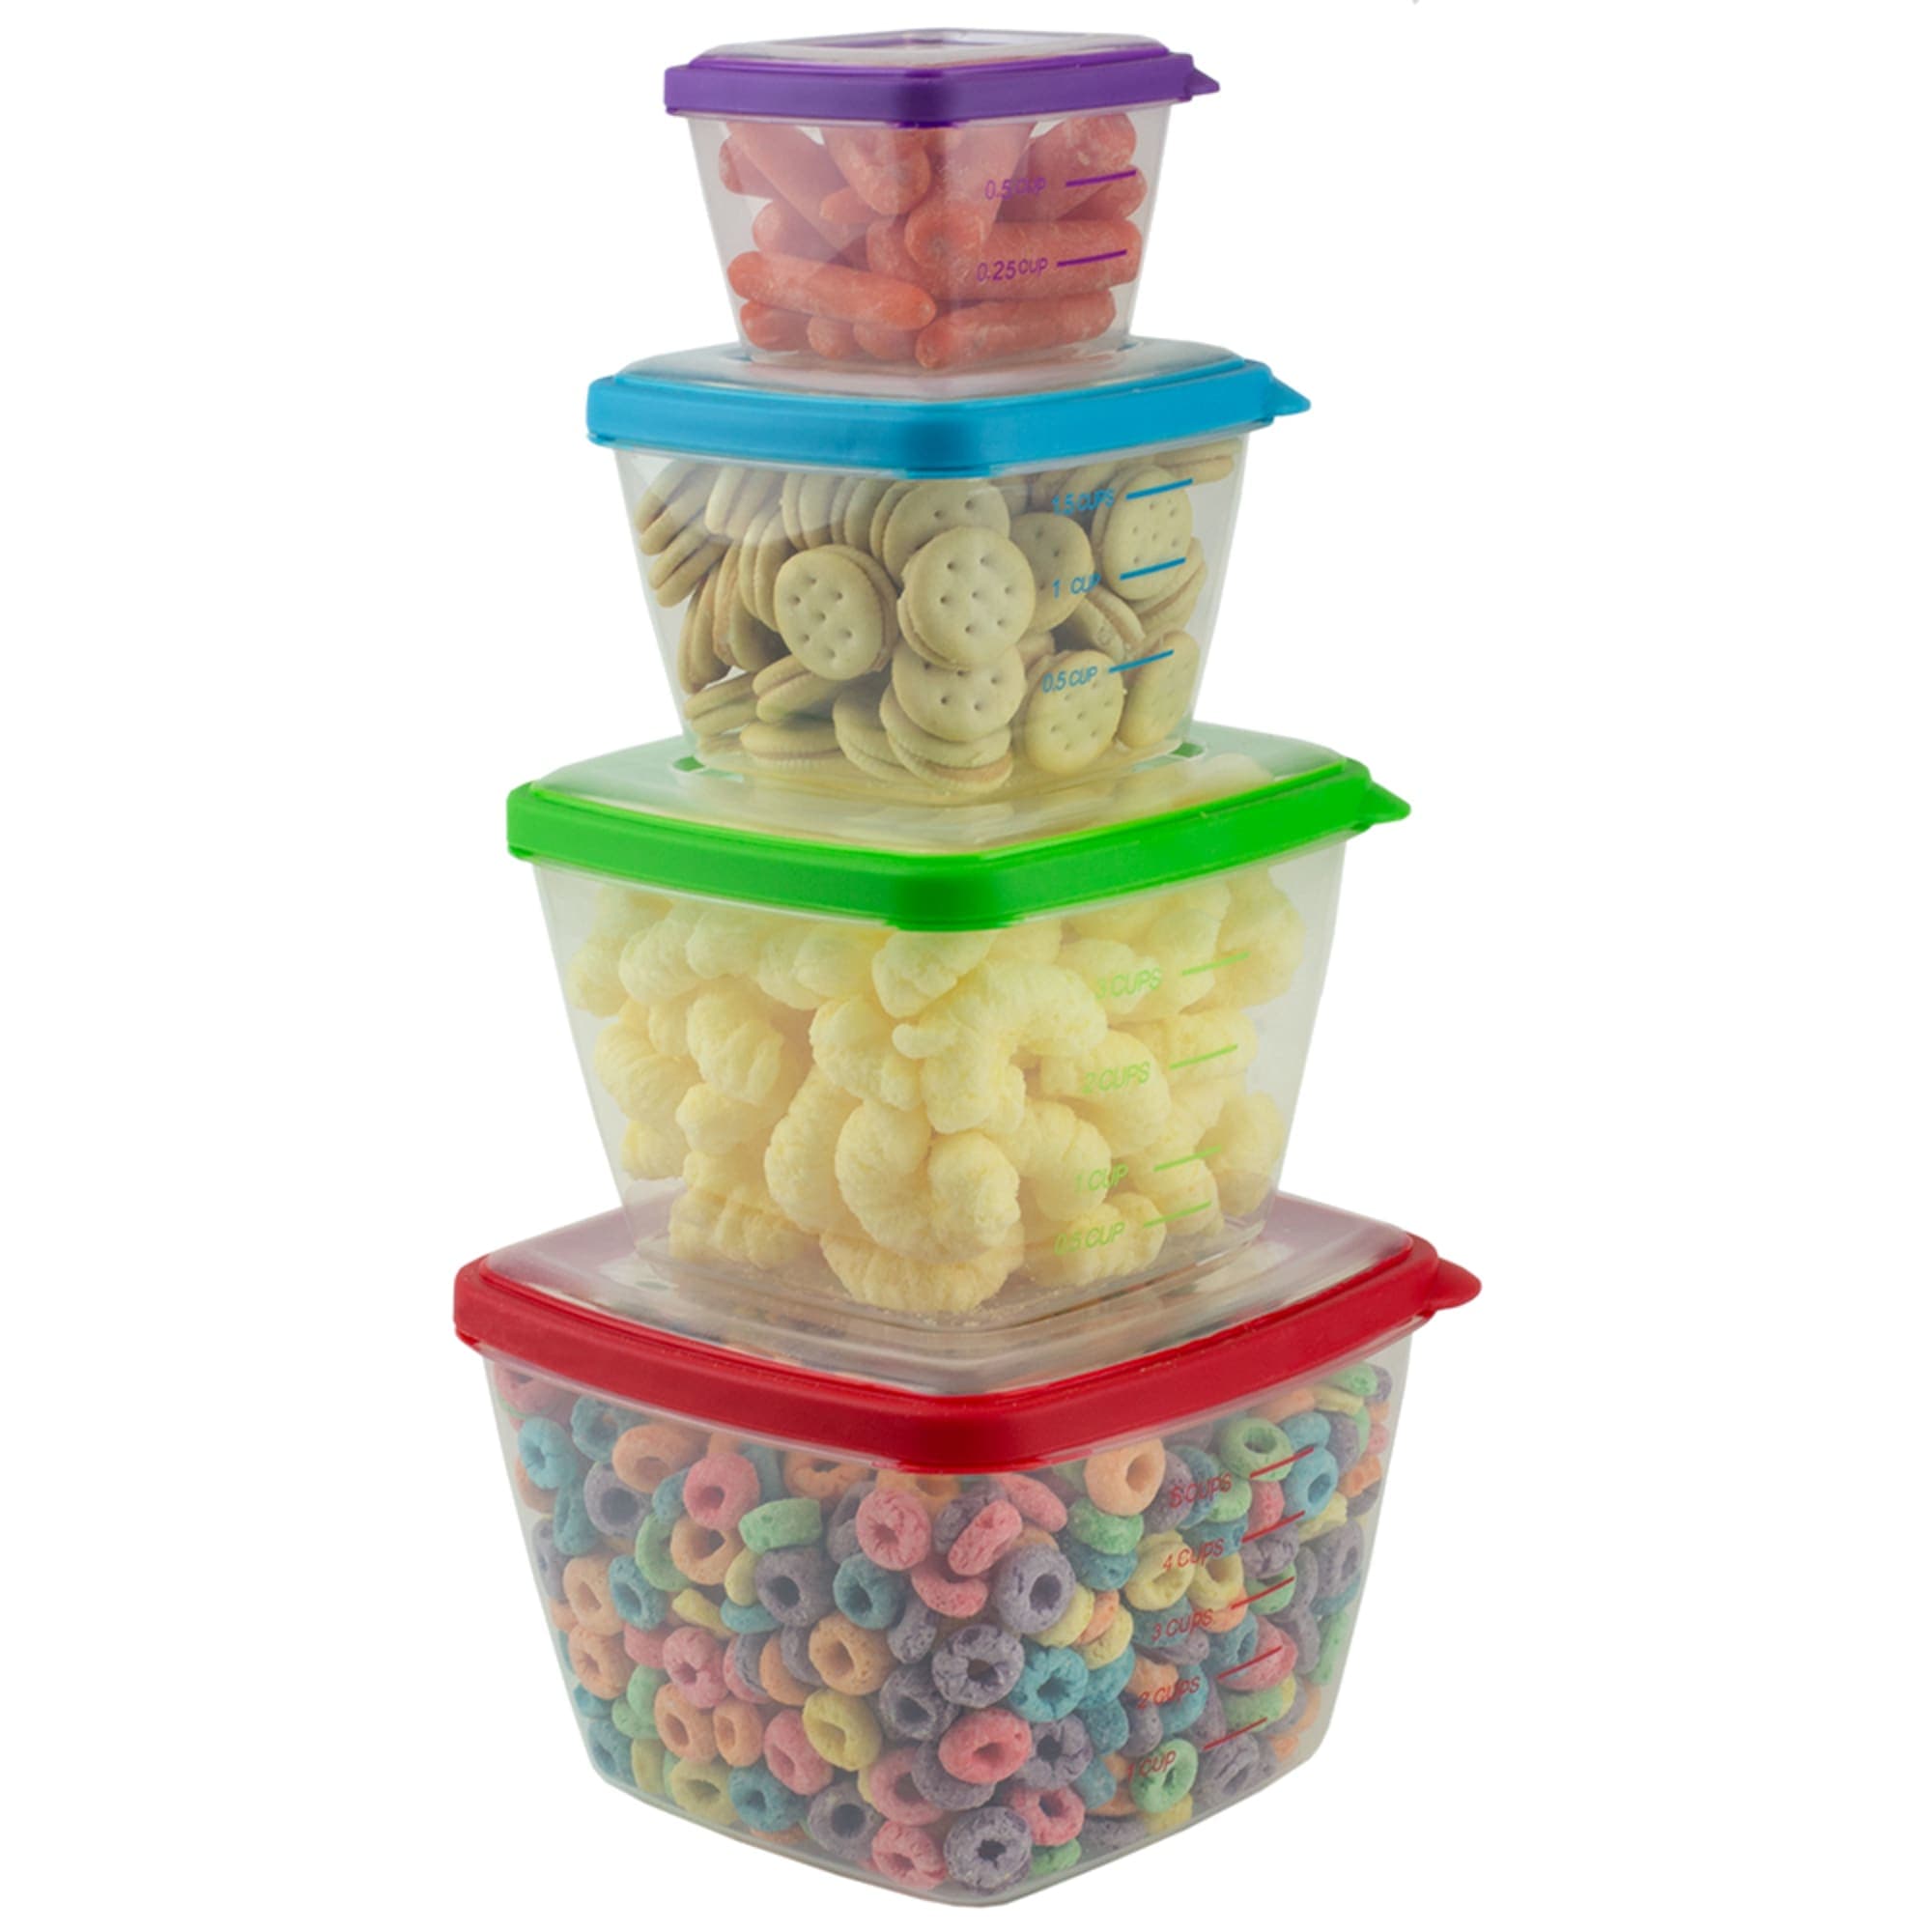 Home Basics 8 Piece Nesting Plastic Food Storage Container Set with Multi-Color Snap-On Lids $5 EACH, CASE PACK OF 12